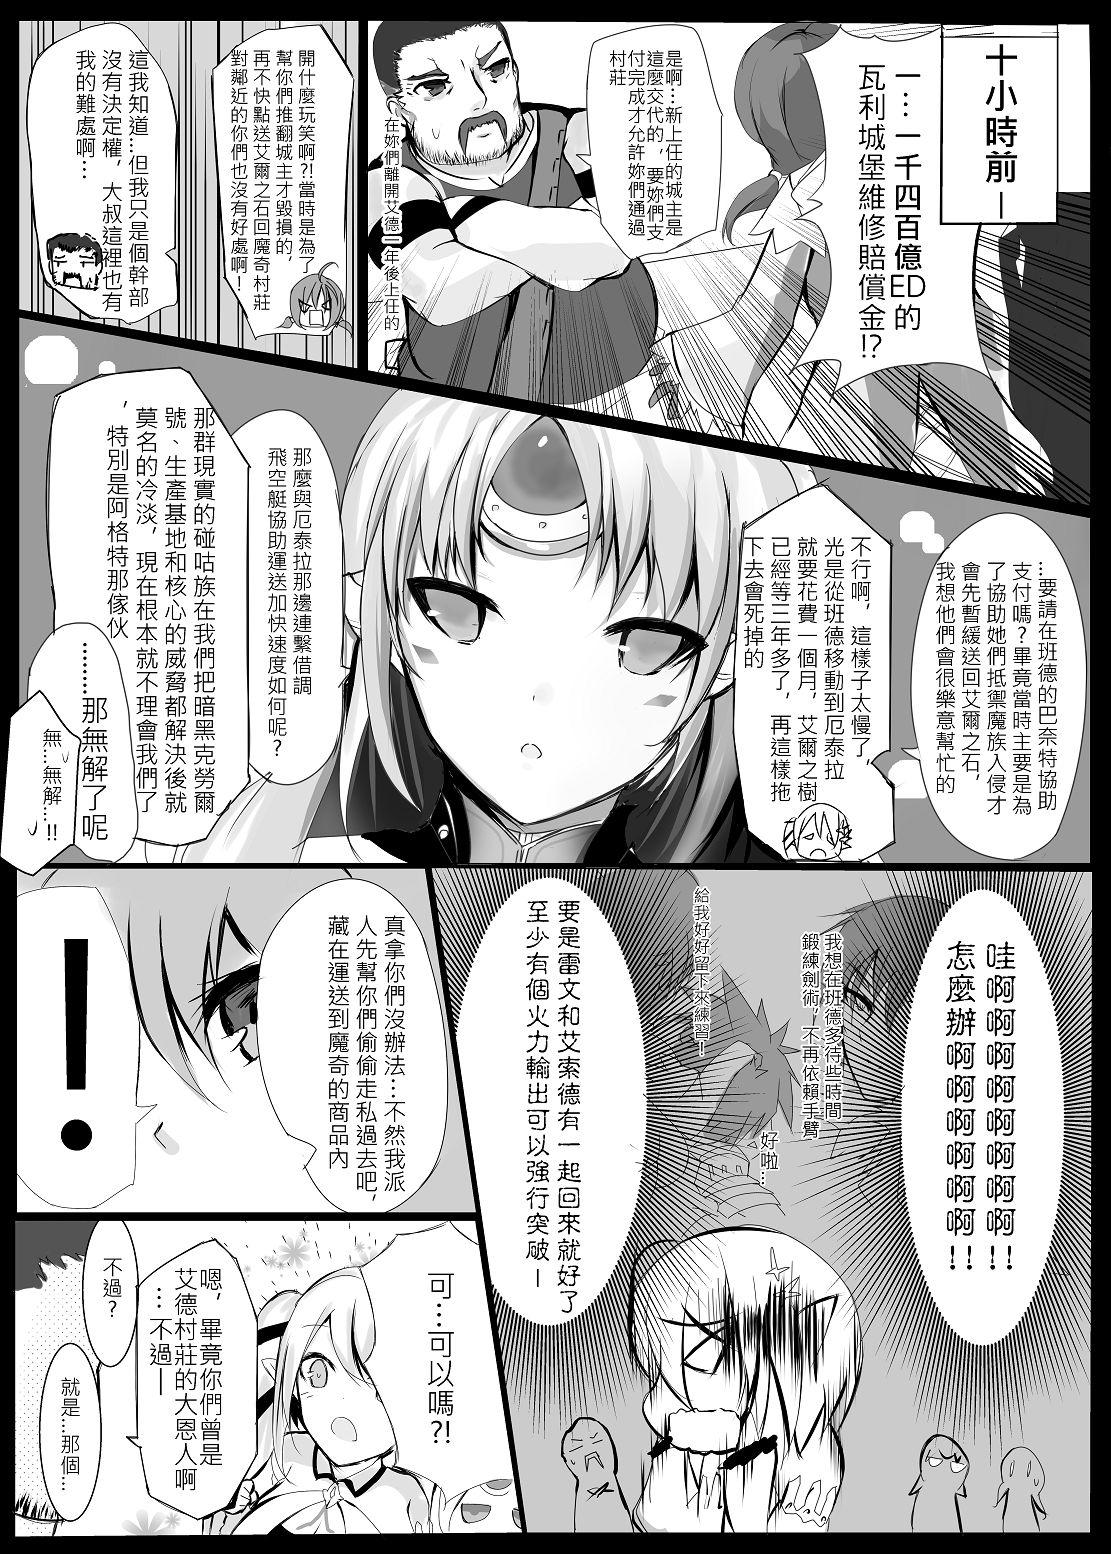 Office Elsword type h - Elsword Bitch - Page 5